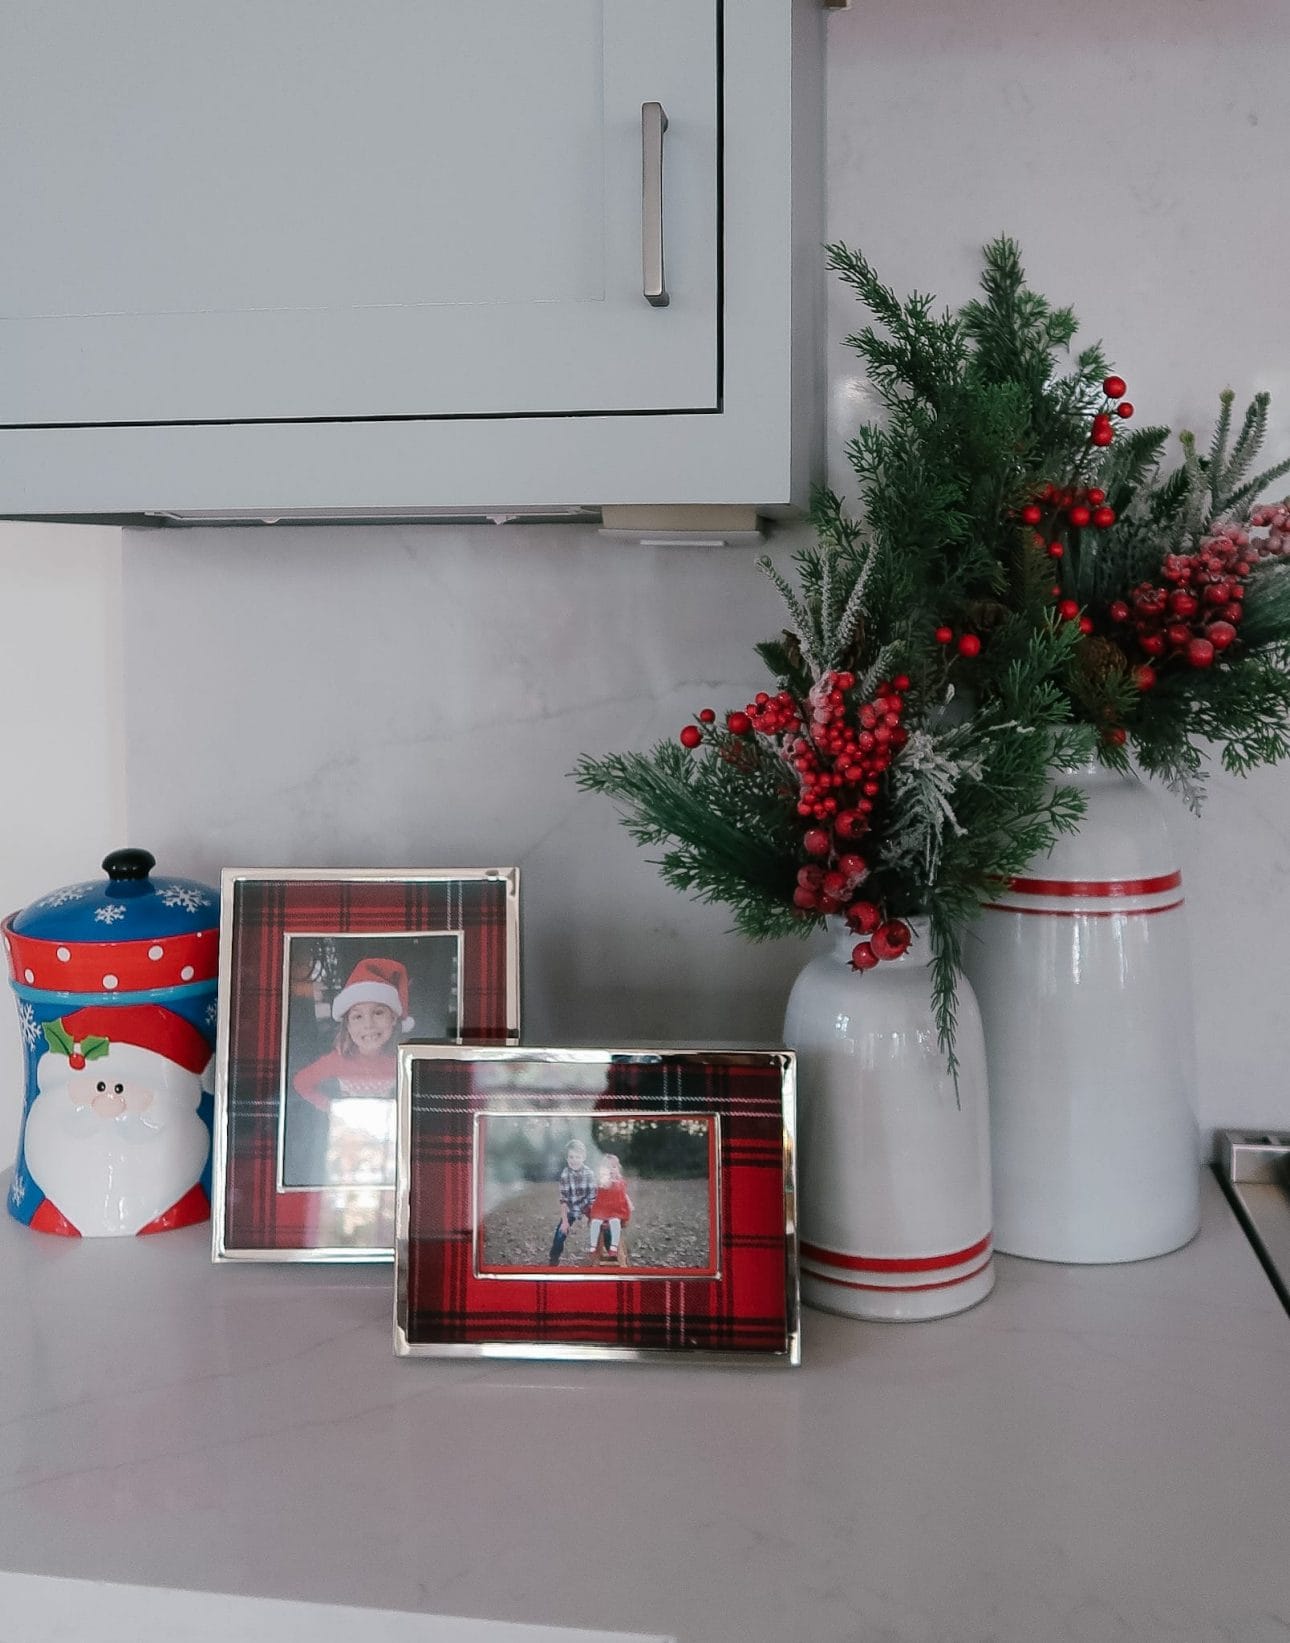 Plaid Picture frames, white with red striped vases, santa cookie jar